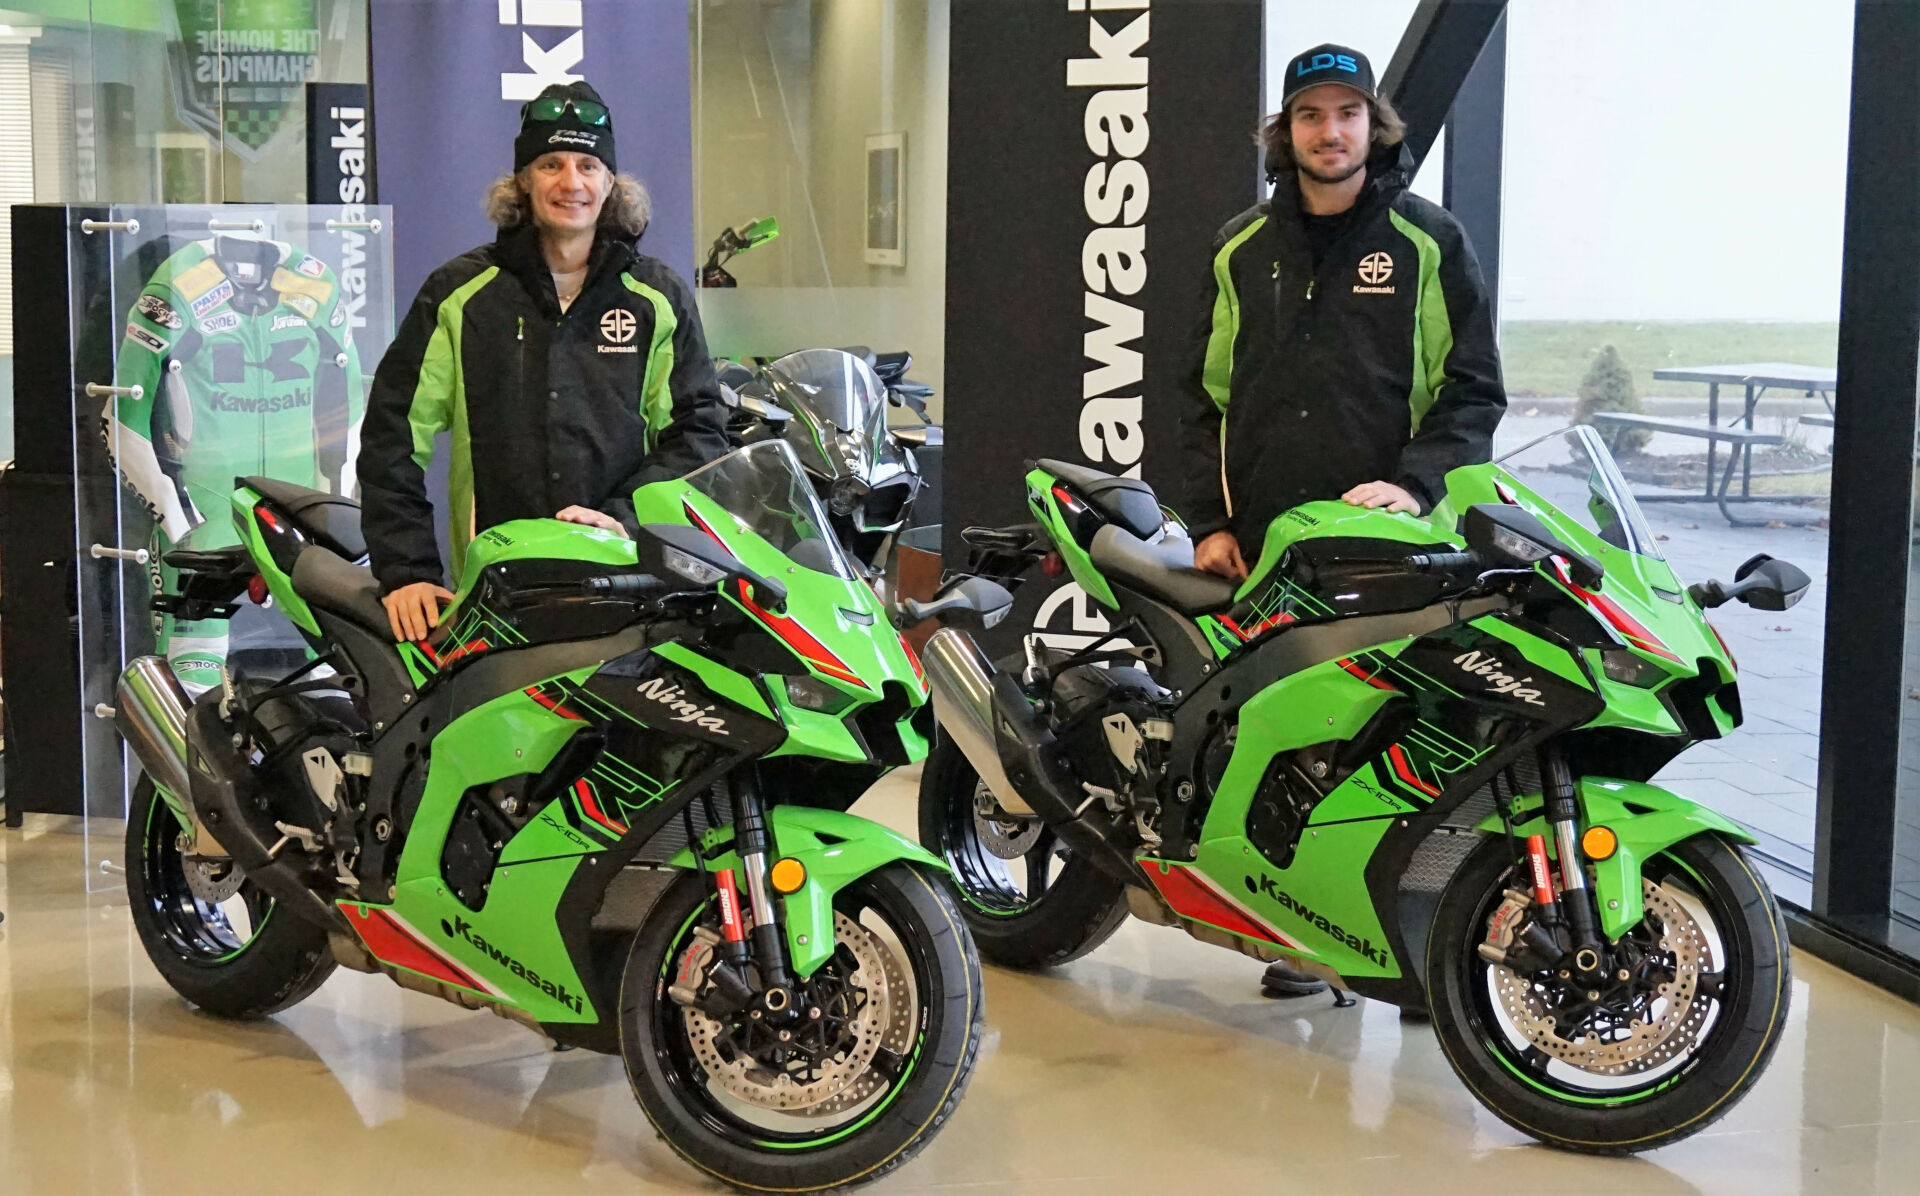 Jordan Szoke (left) is set to return to CSBK action in 2023 with reigning Pro Sport Bike champion Trevor Dion (right) as his teammate. Photo courtesy Canadian Kawasaki.